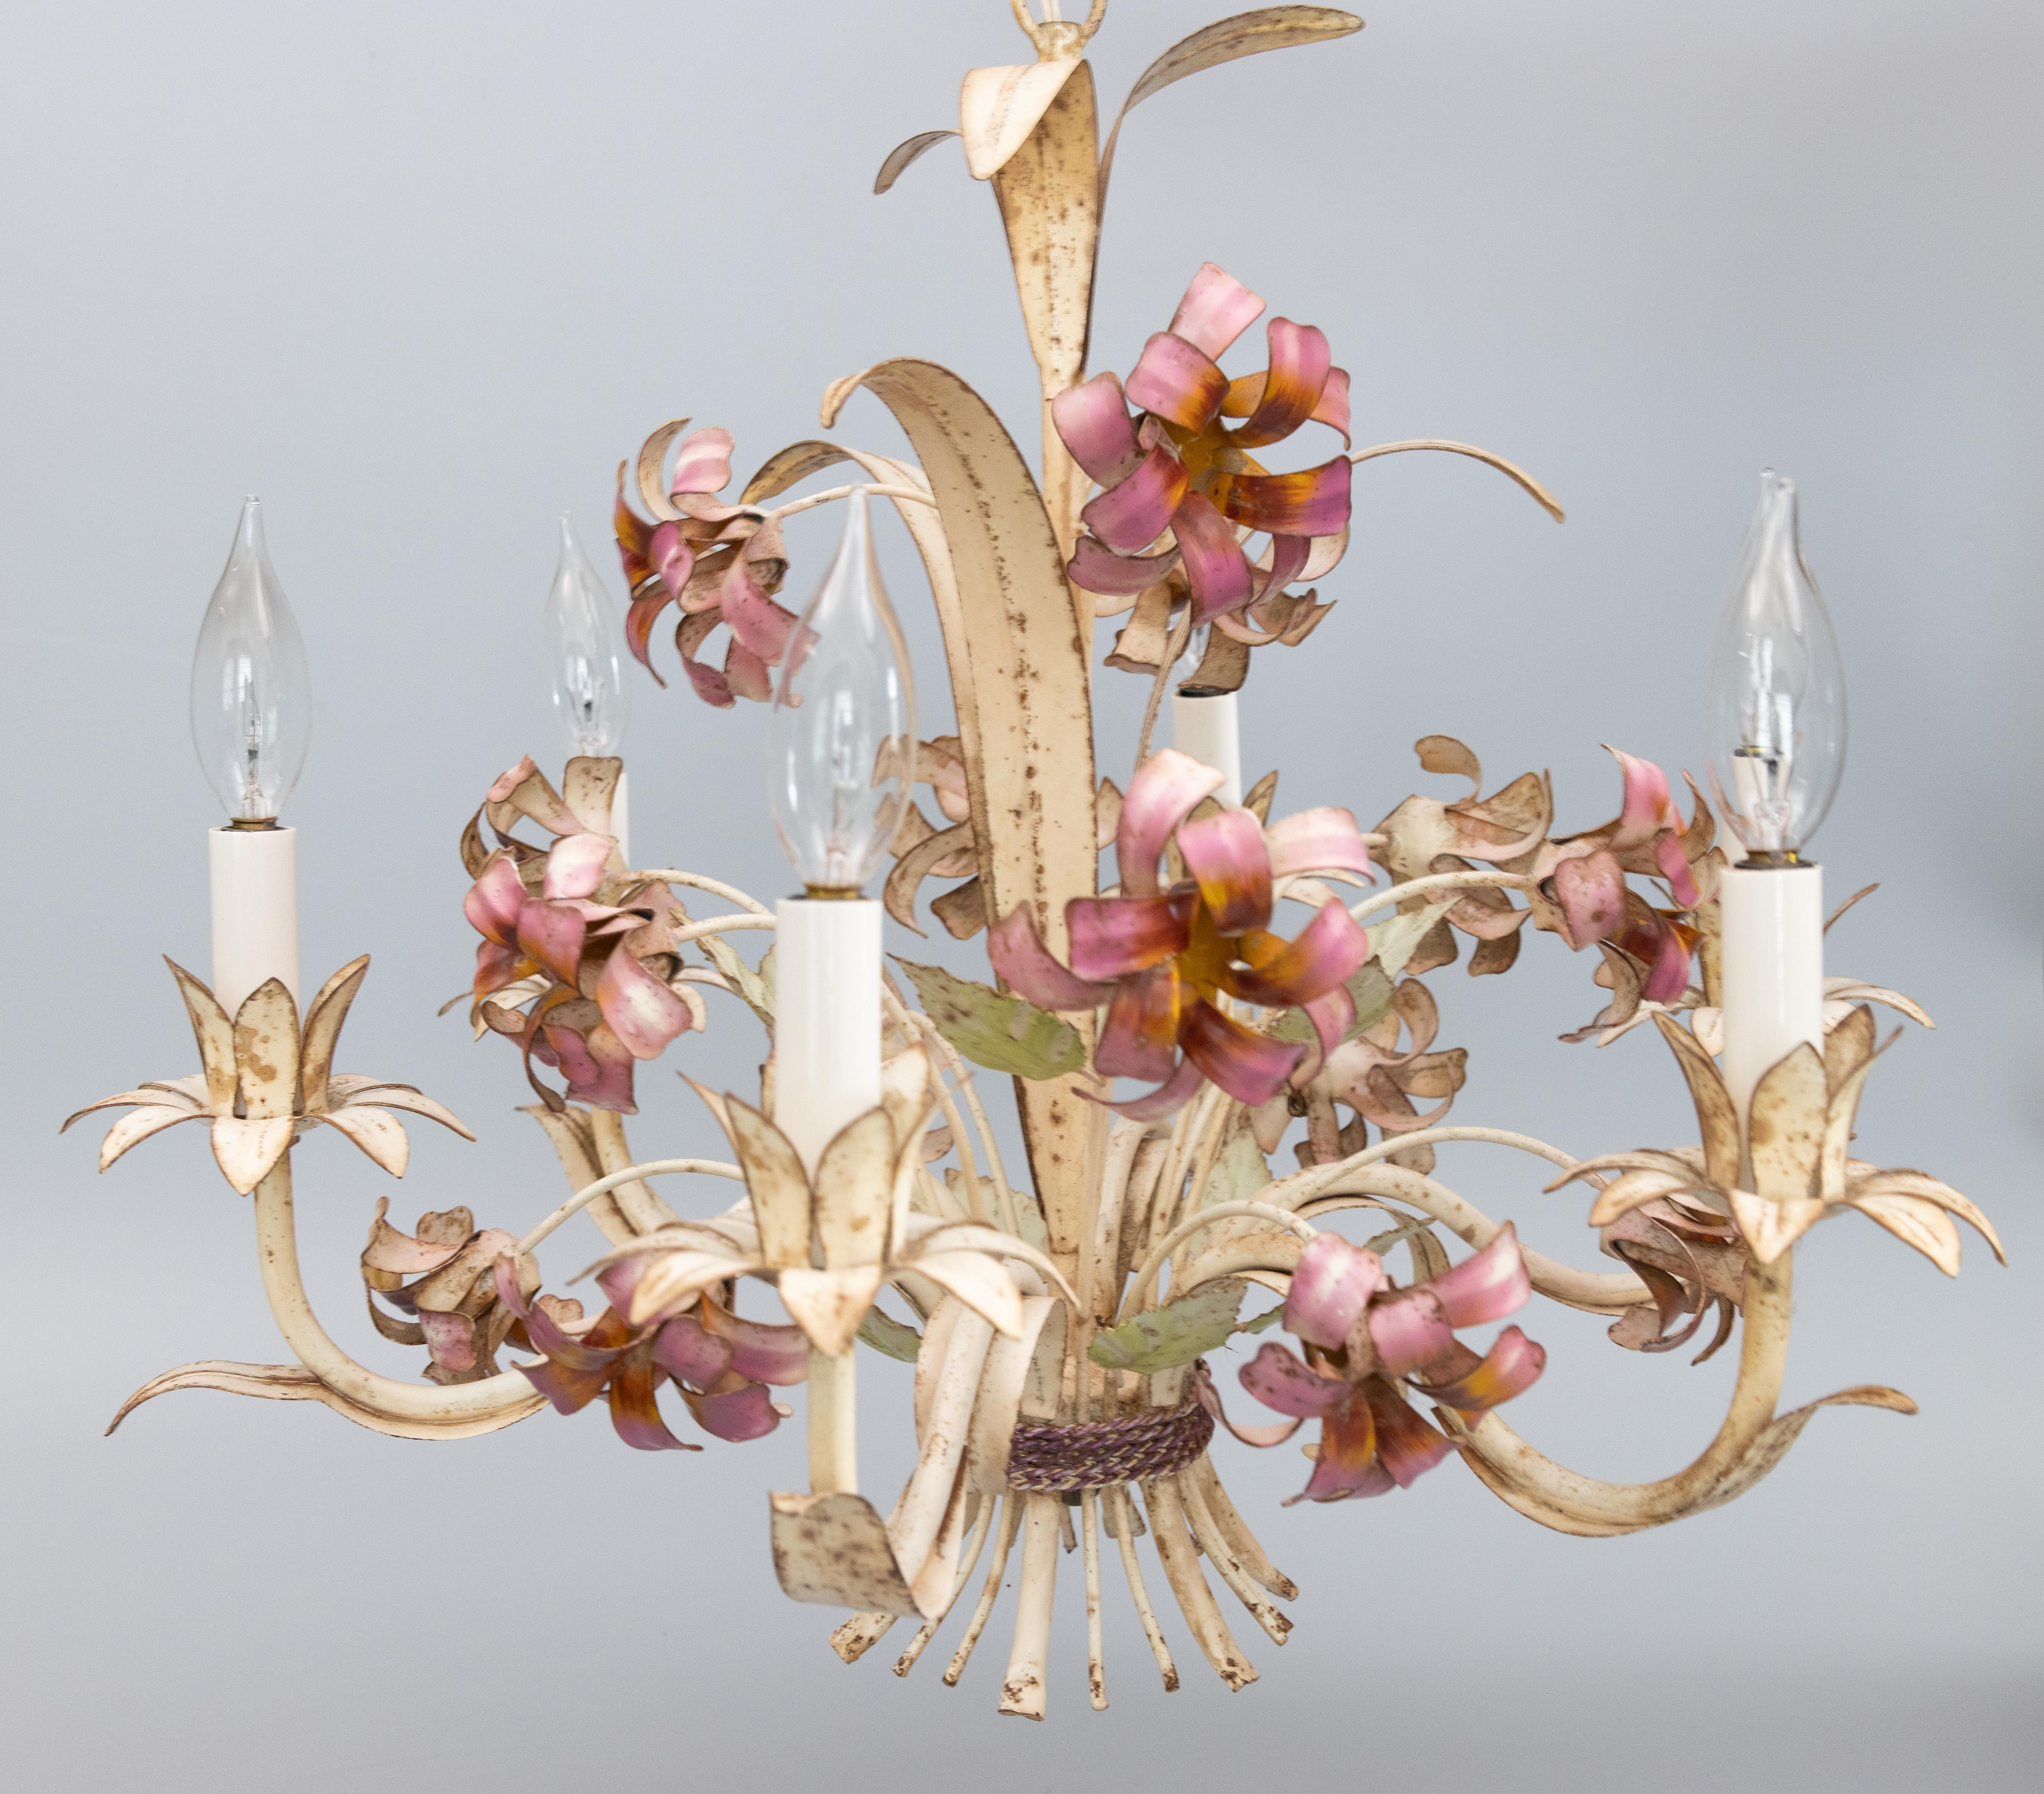 Mid-20th century Italian tole floral six-arm chandelier. This charming hand painted chandelier has scrolling green leaves and lovely pink flowers. It's in excellent working condition and comes with the original ceiling plate and 3 inches of chain.